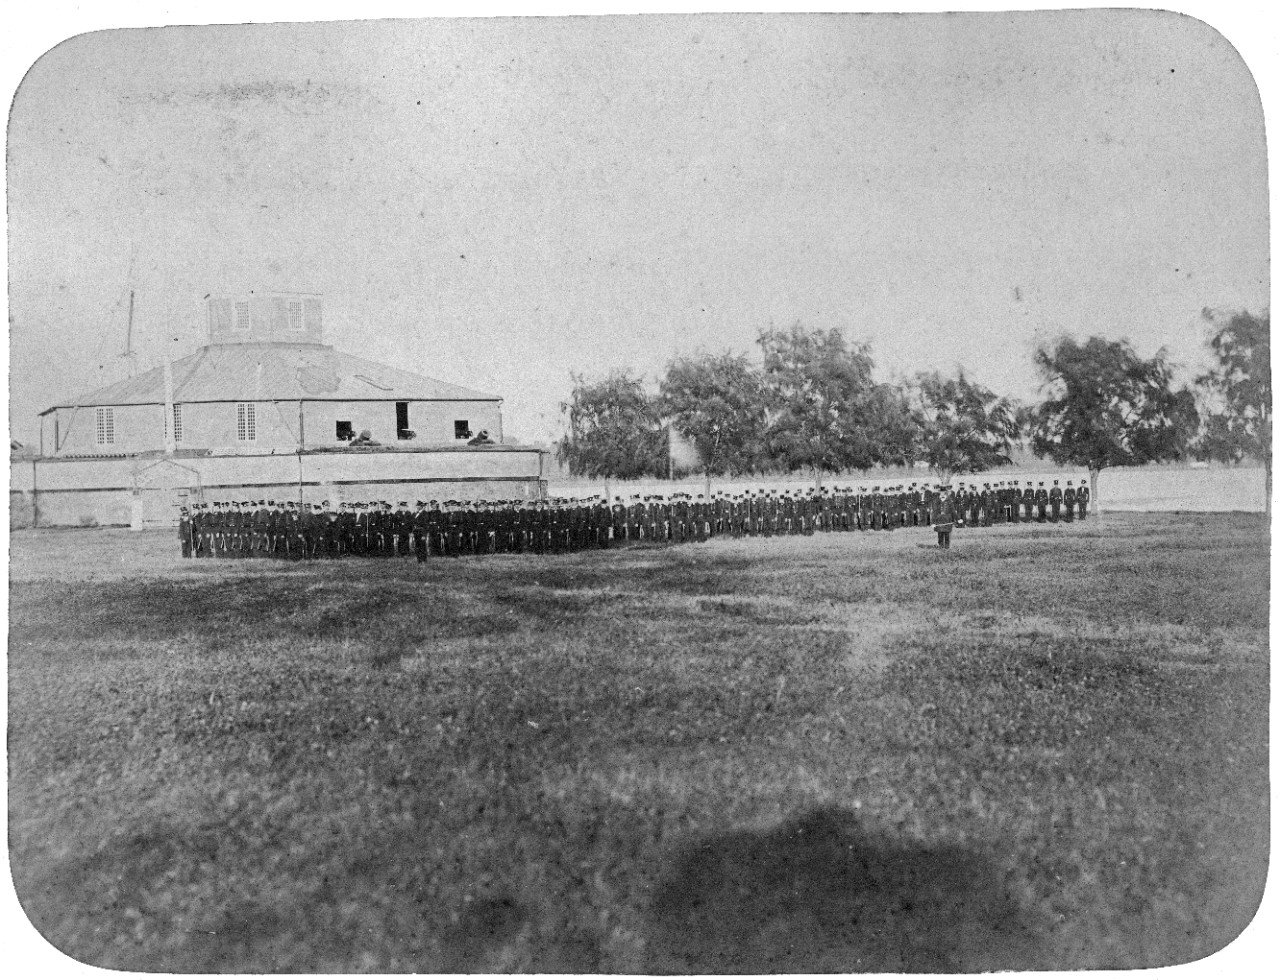 11 oversize photographs of the United States Naval Academy during the 19th century, donated by Miss Wadleigh to the Naval Historical Foundation in 1927, and later donated to the Naval History and Heritage Command. Scenes circa 1860 include: Superintendant’s House, Officer Quarters, Blake Row, Hospital, Recitation Hall, Midshipmen’s Quarters, Chapel, Mess Hall, Observatory, Mexican War Midshipmen’s Monument, midshipmen on parade, Dining Hall, Fort Severn. Scenes from later in the 19th century include: Armory, Gunnery Building. Photos by C.T. Jewell, Washington D.C., and Fischer and Bros., Baltimore, Maryland.